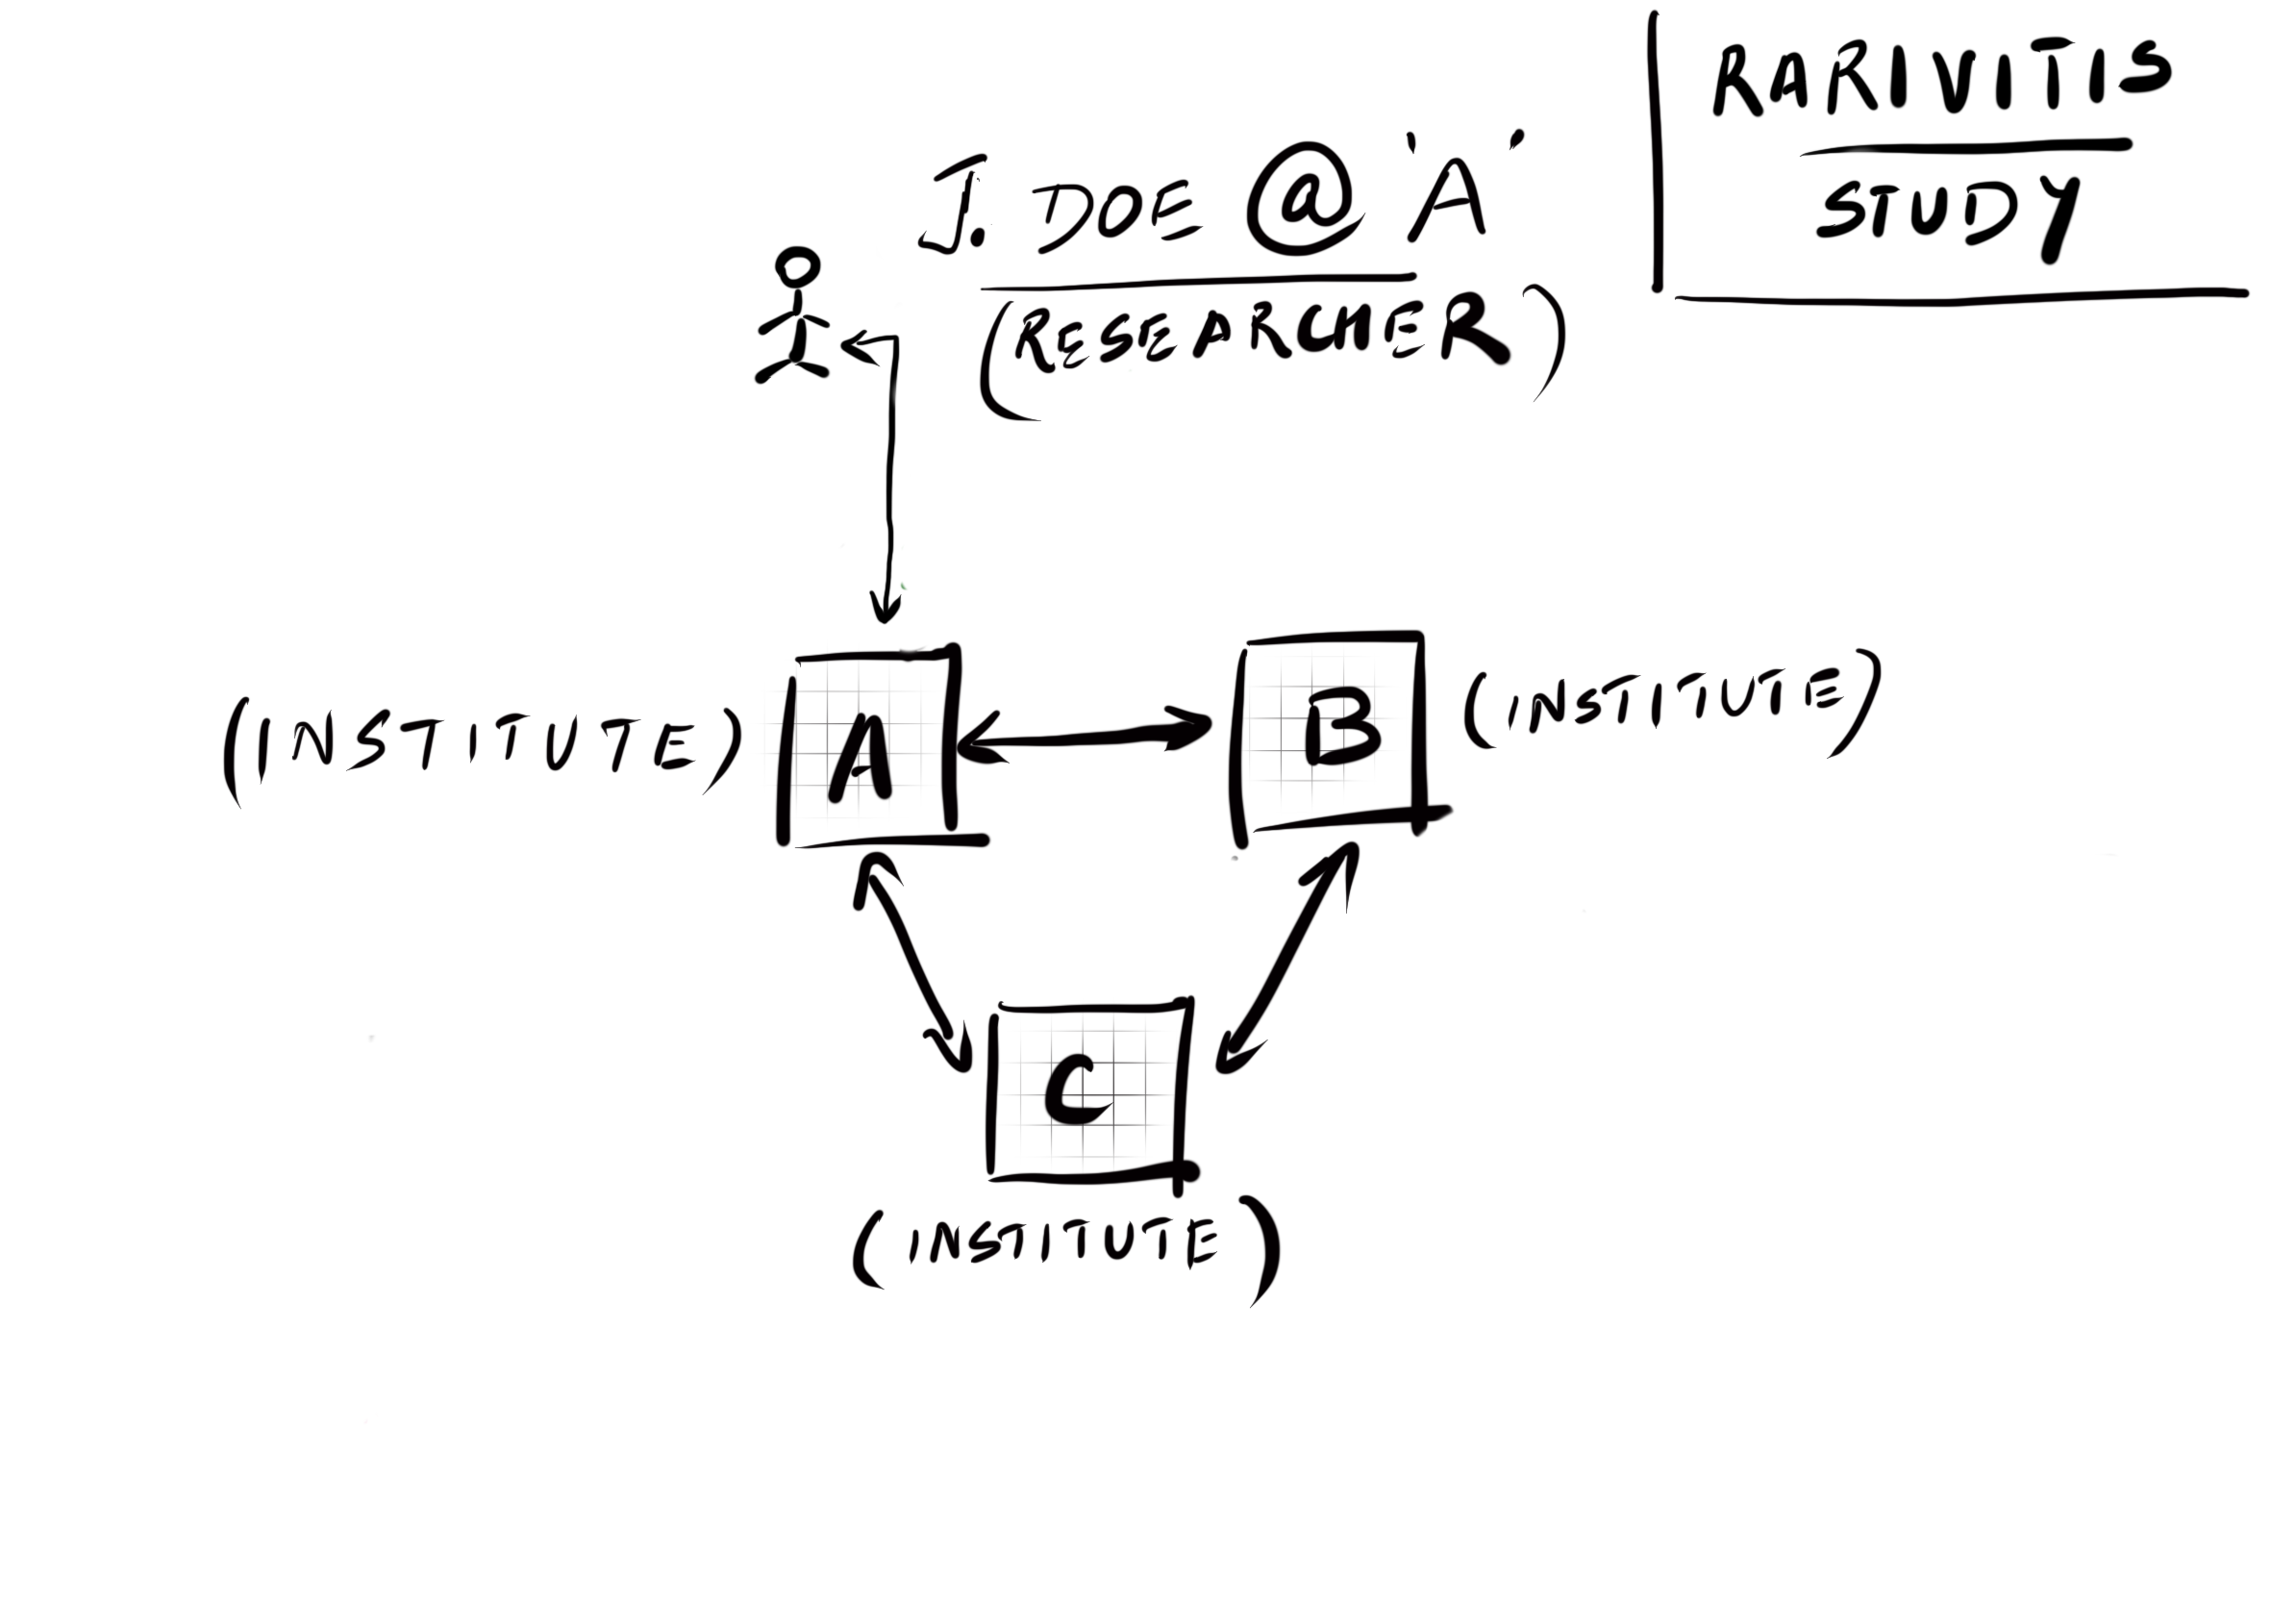 Diagram showing three institutes sharing data with a researcher of one institute logging in